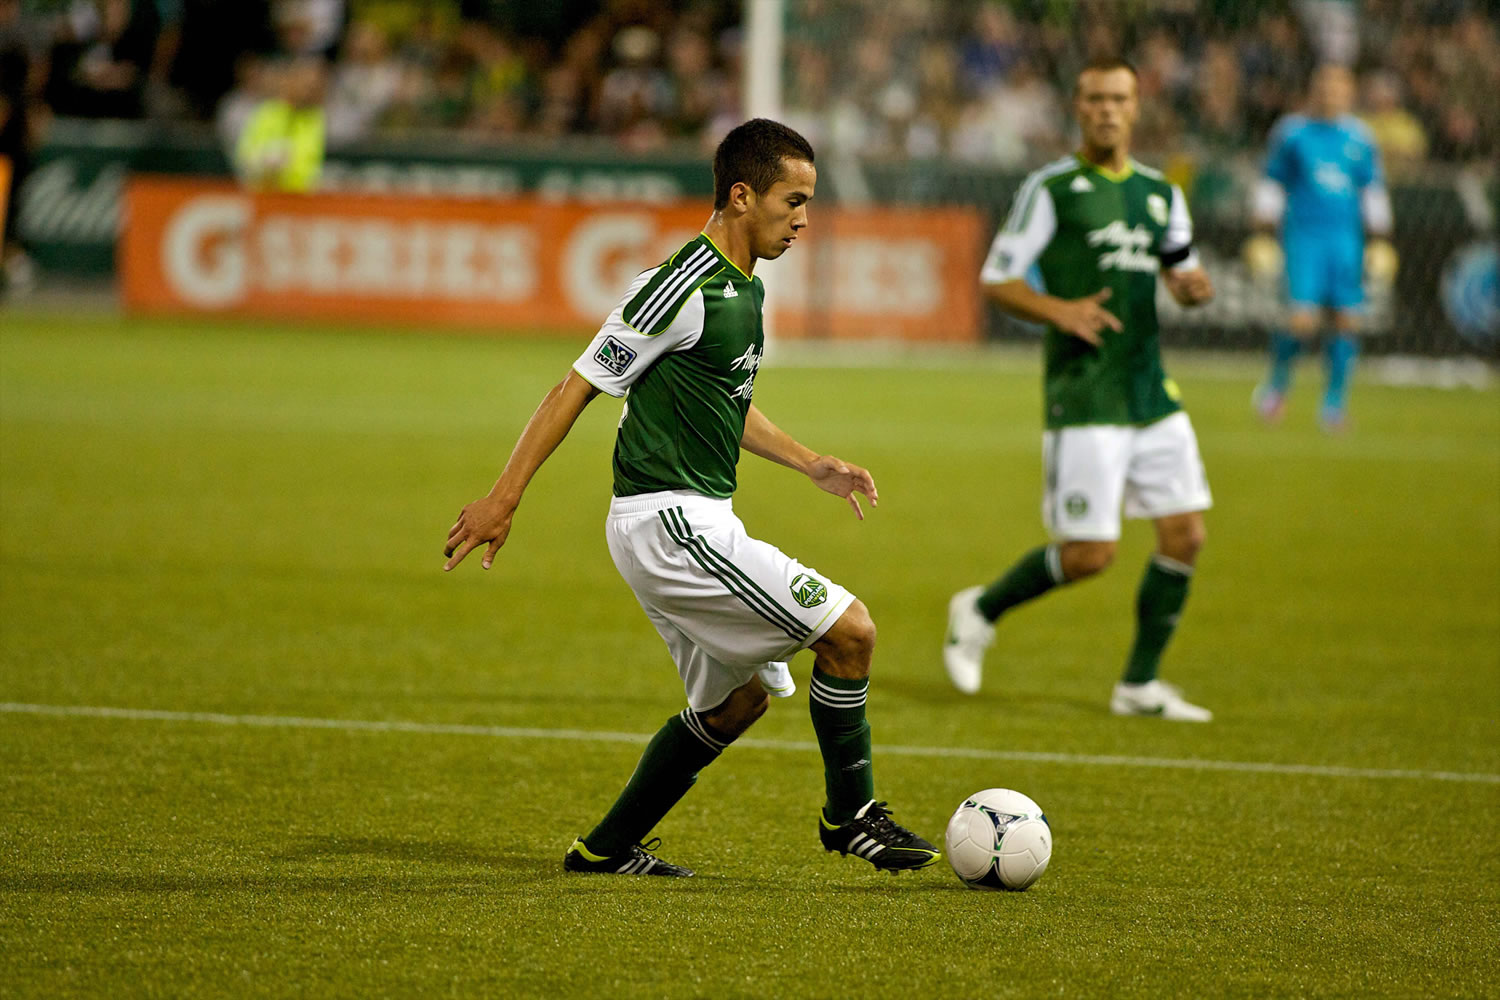 Brent Richards made his debut with the Portland Timbers against the L.A. Galaxy July 14, at JELD-WEN Field.